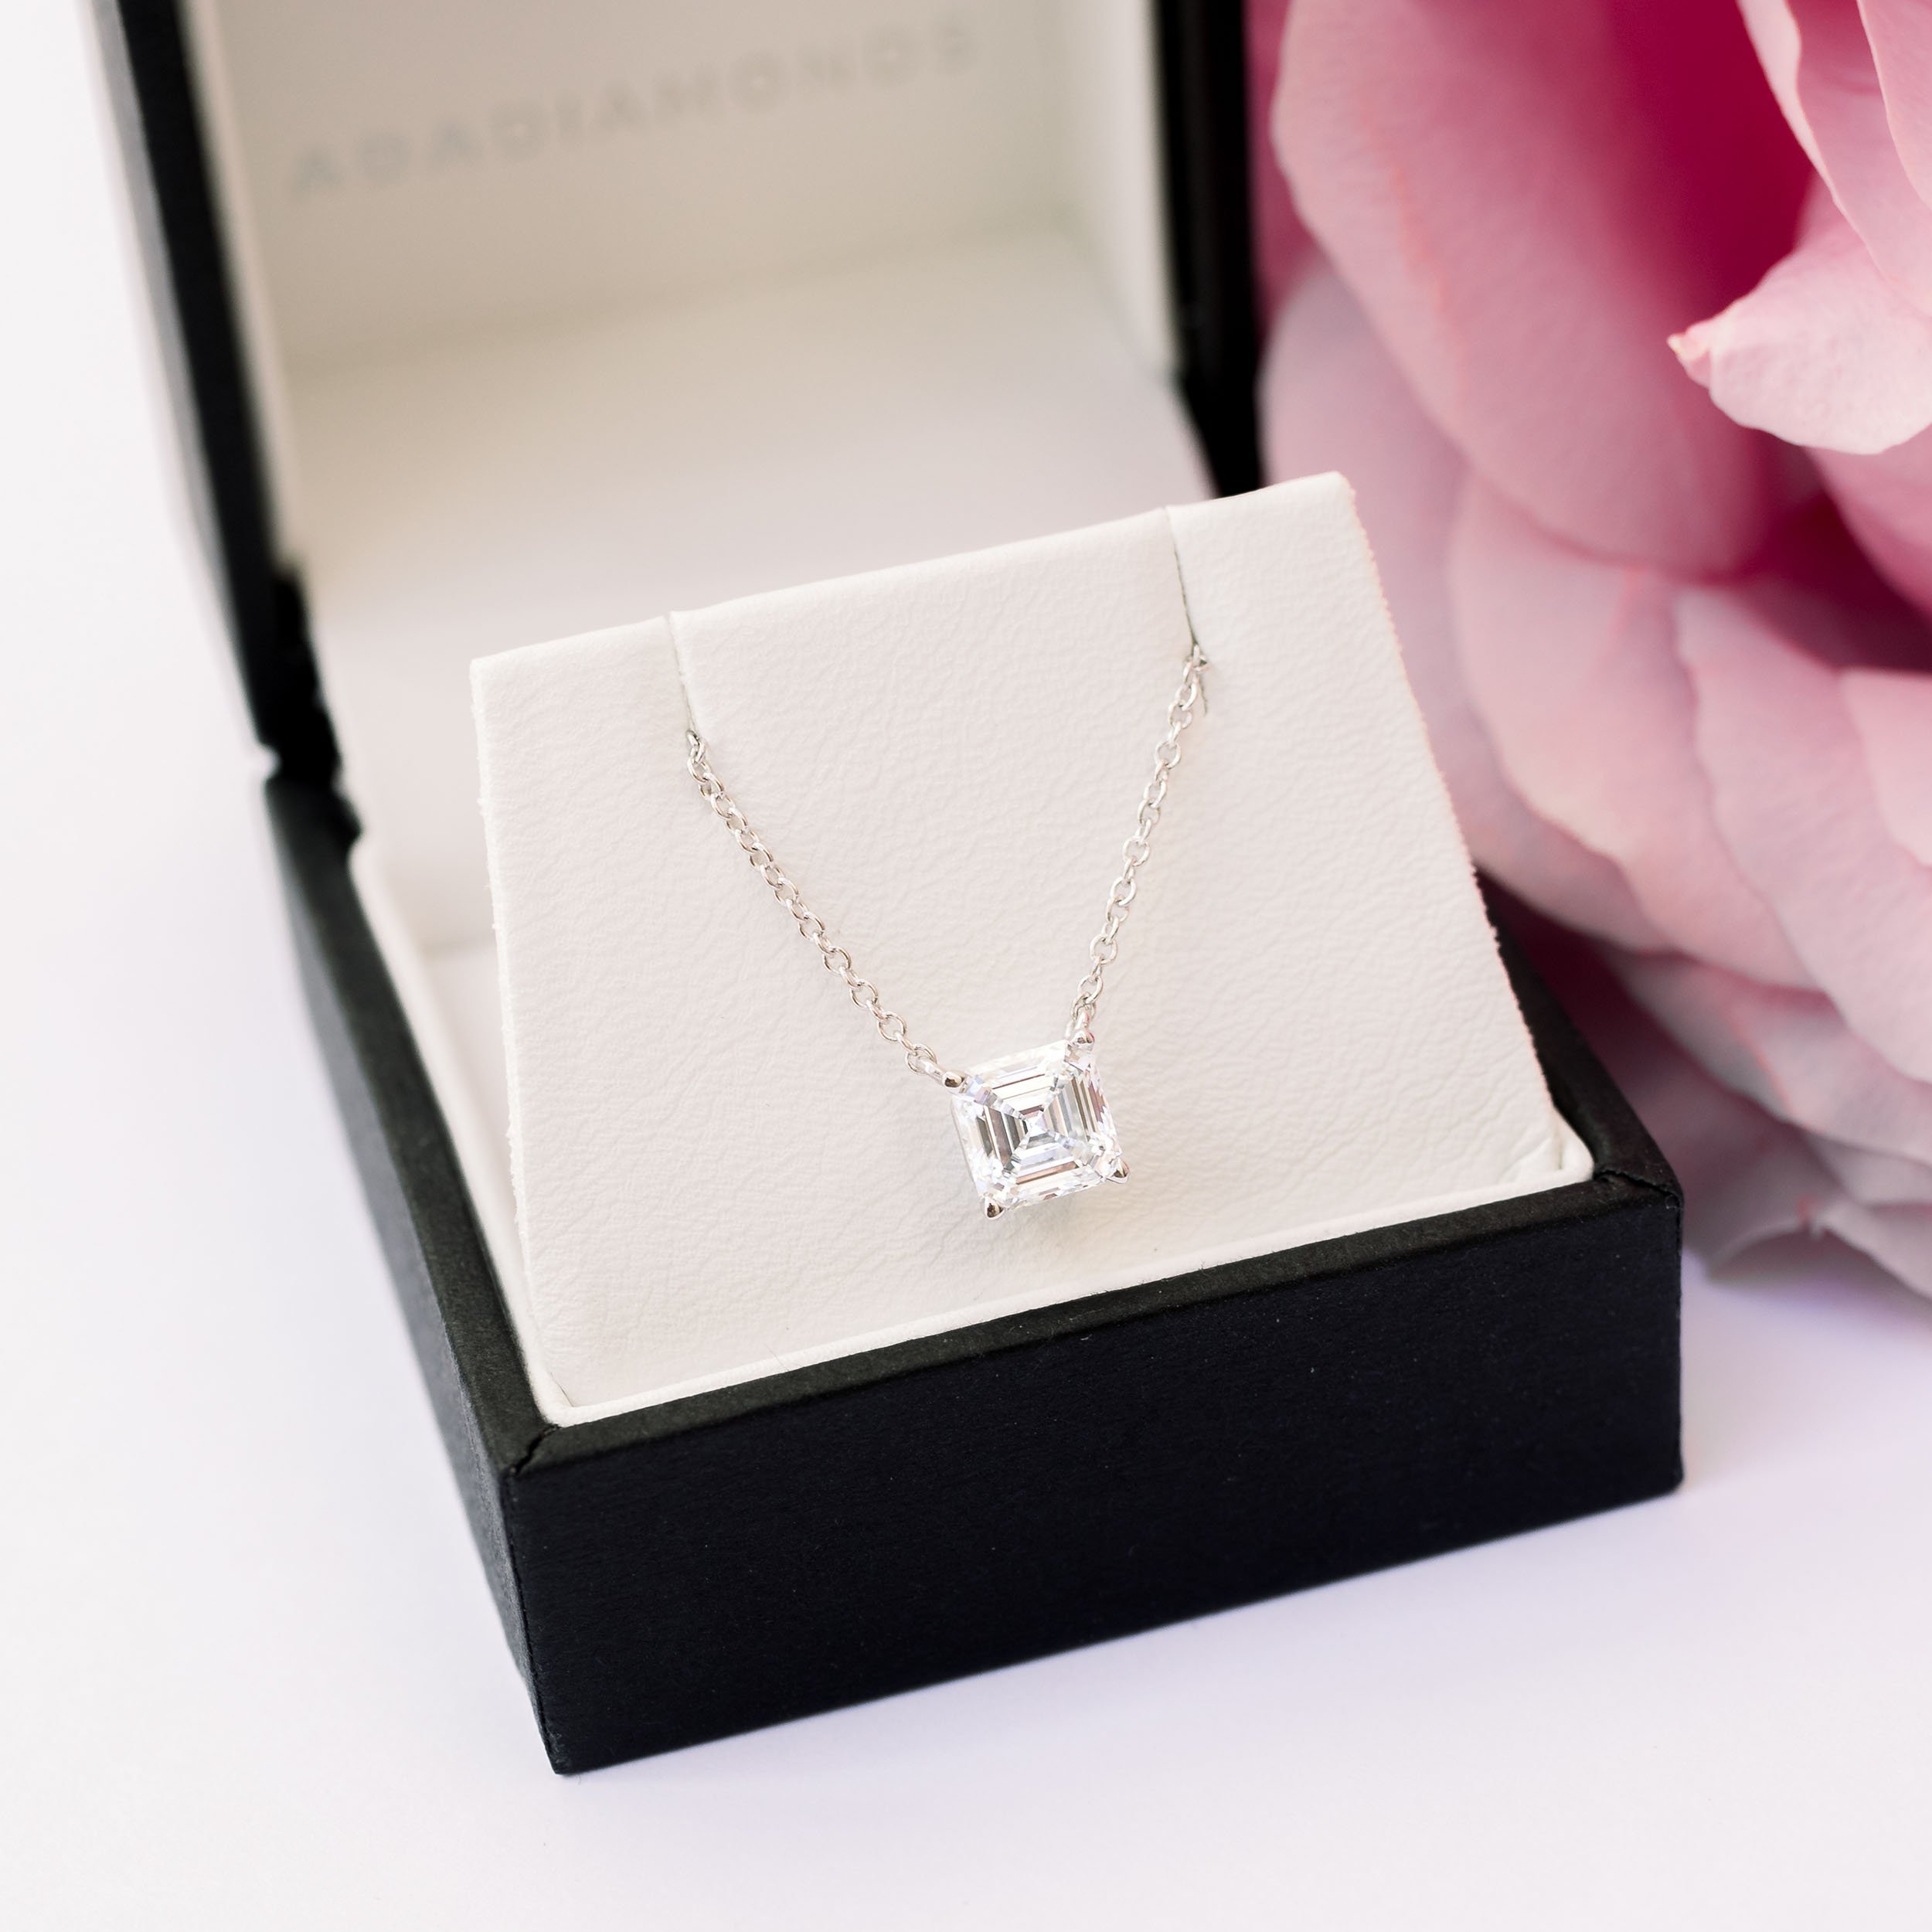 Pendants :: NaNa 2.0ctw Pure Brilliance Zirconia Asscher Cut Solitaire Halo Pendant  Necklace Sterling Silver with Chain - Custom Gemstone Rings (Mothers Rings,  Mothers Day Rings), Necklaces, Earrings, and Bracelets offered by